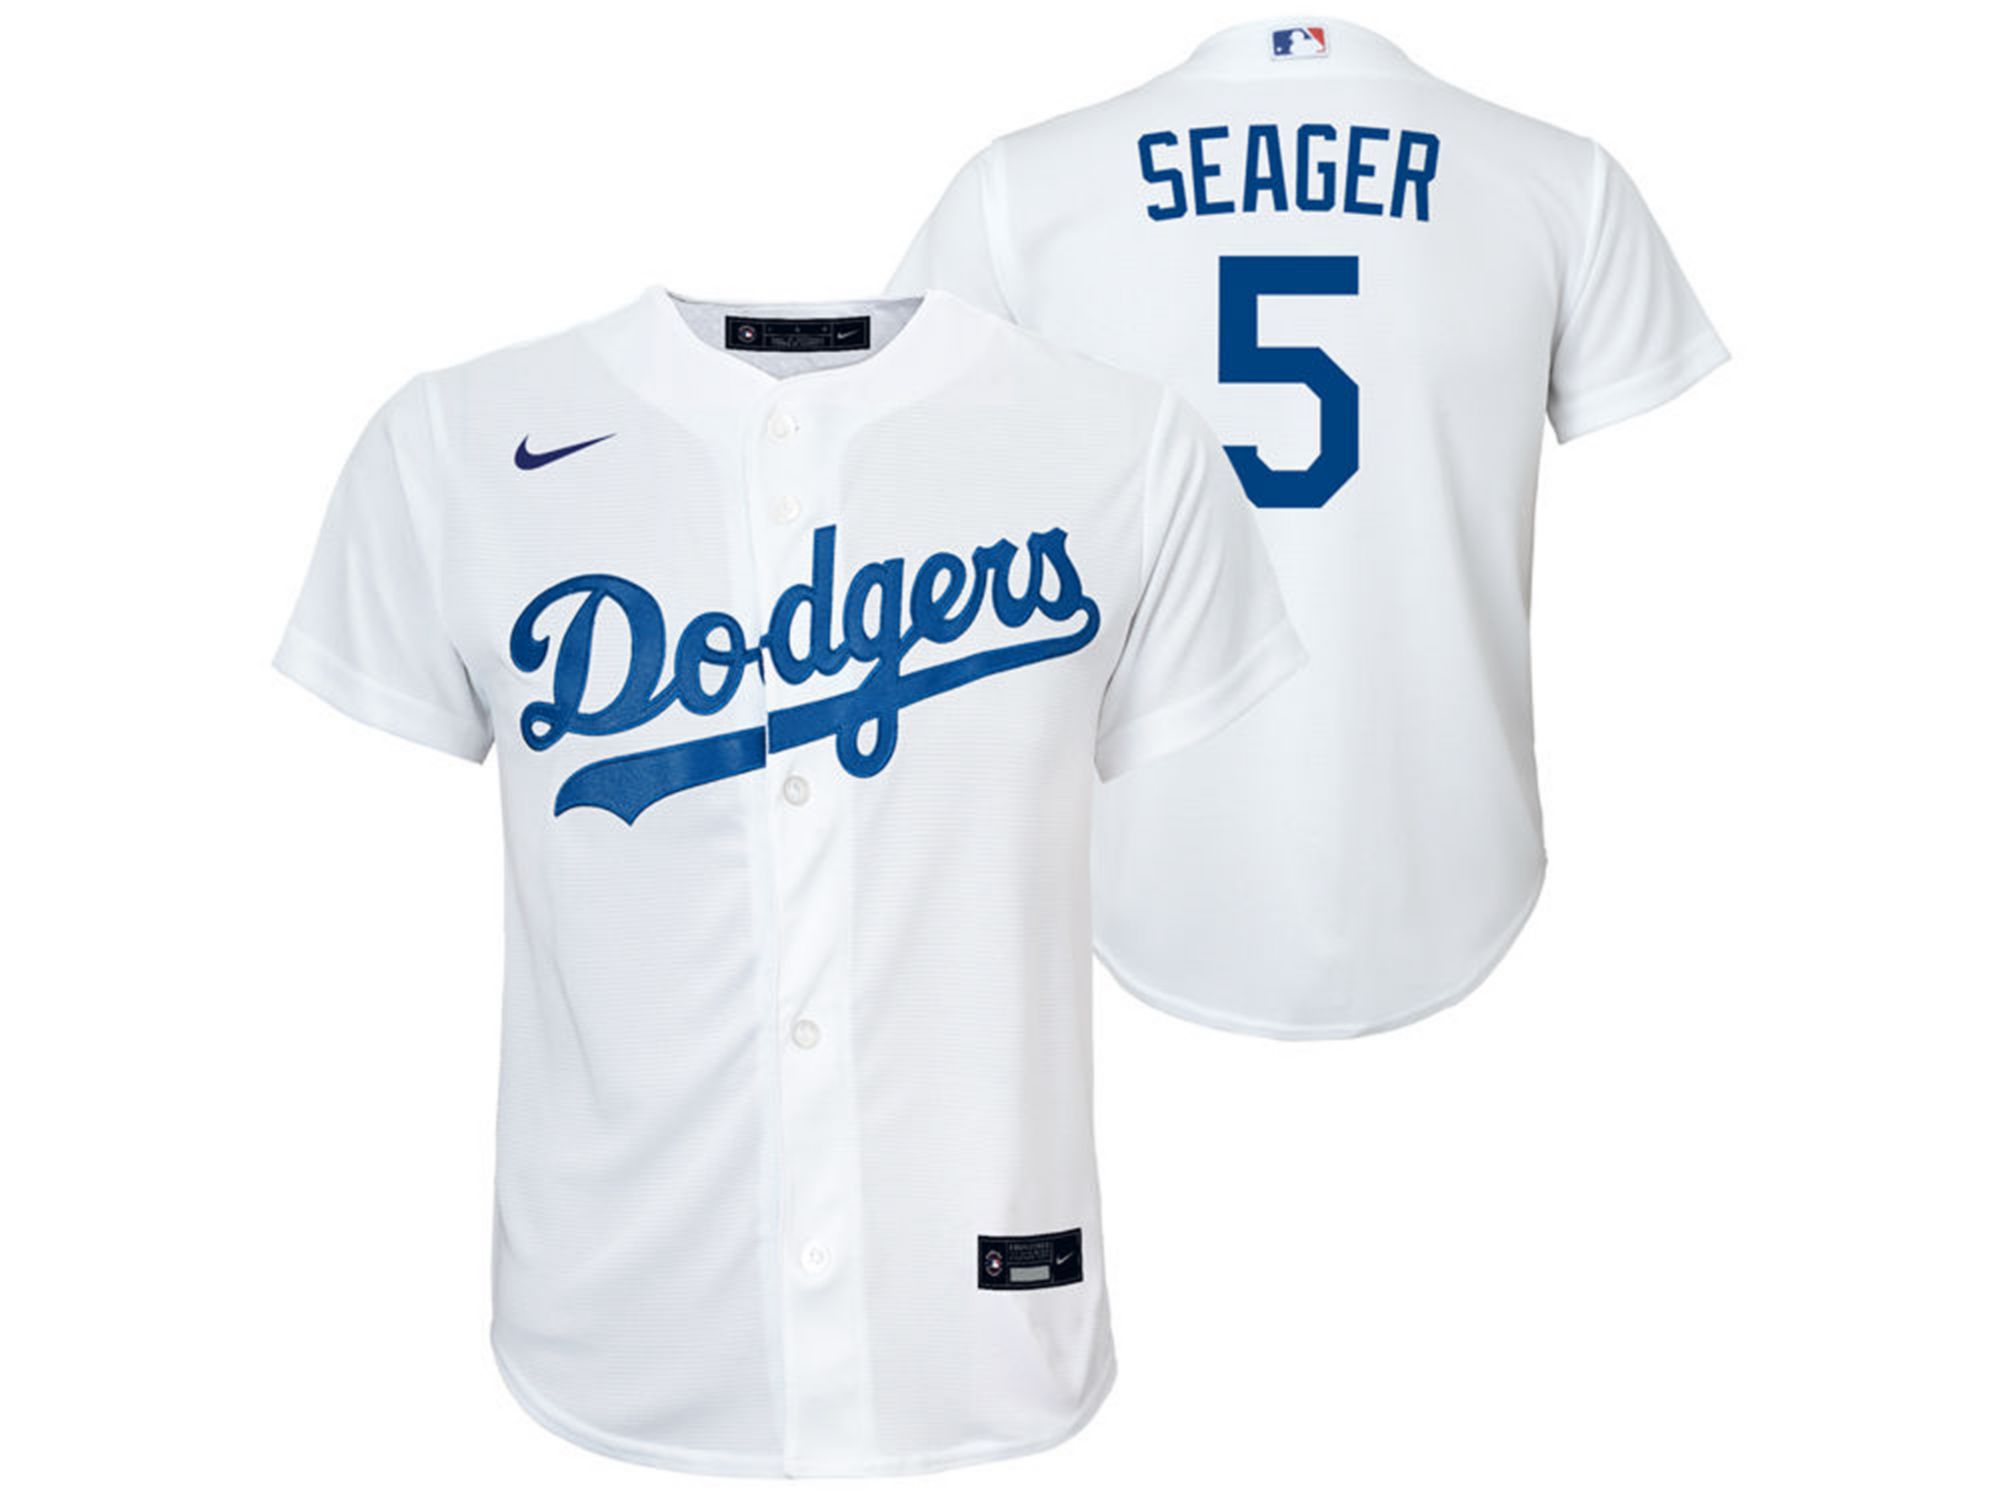 Nike Los Angeles Dodgers Youth Official Player Jersey Corey Seager & Reviews - Sports Fan Shop By Lids - Men - Macy's